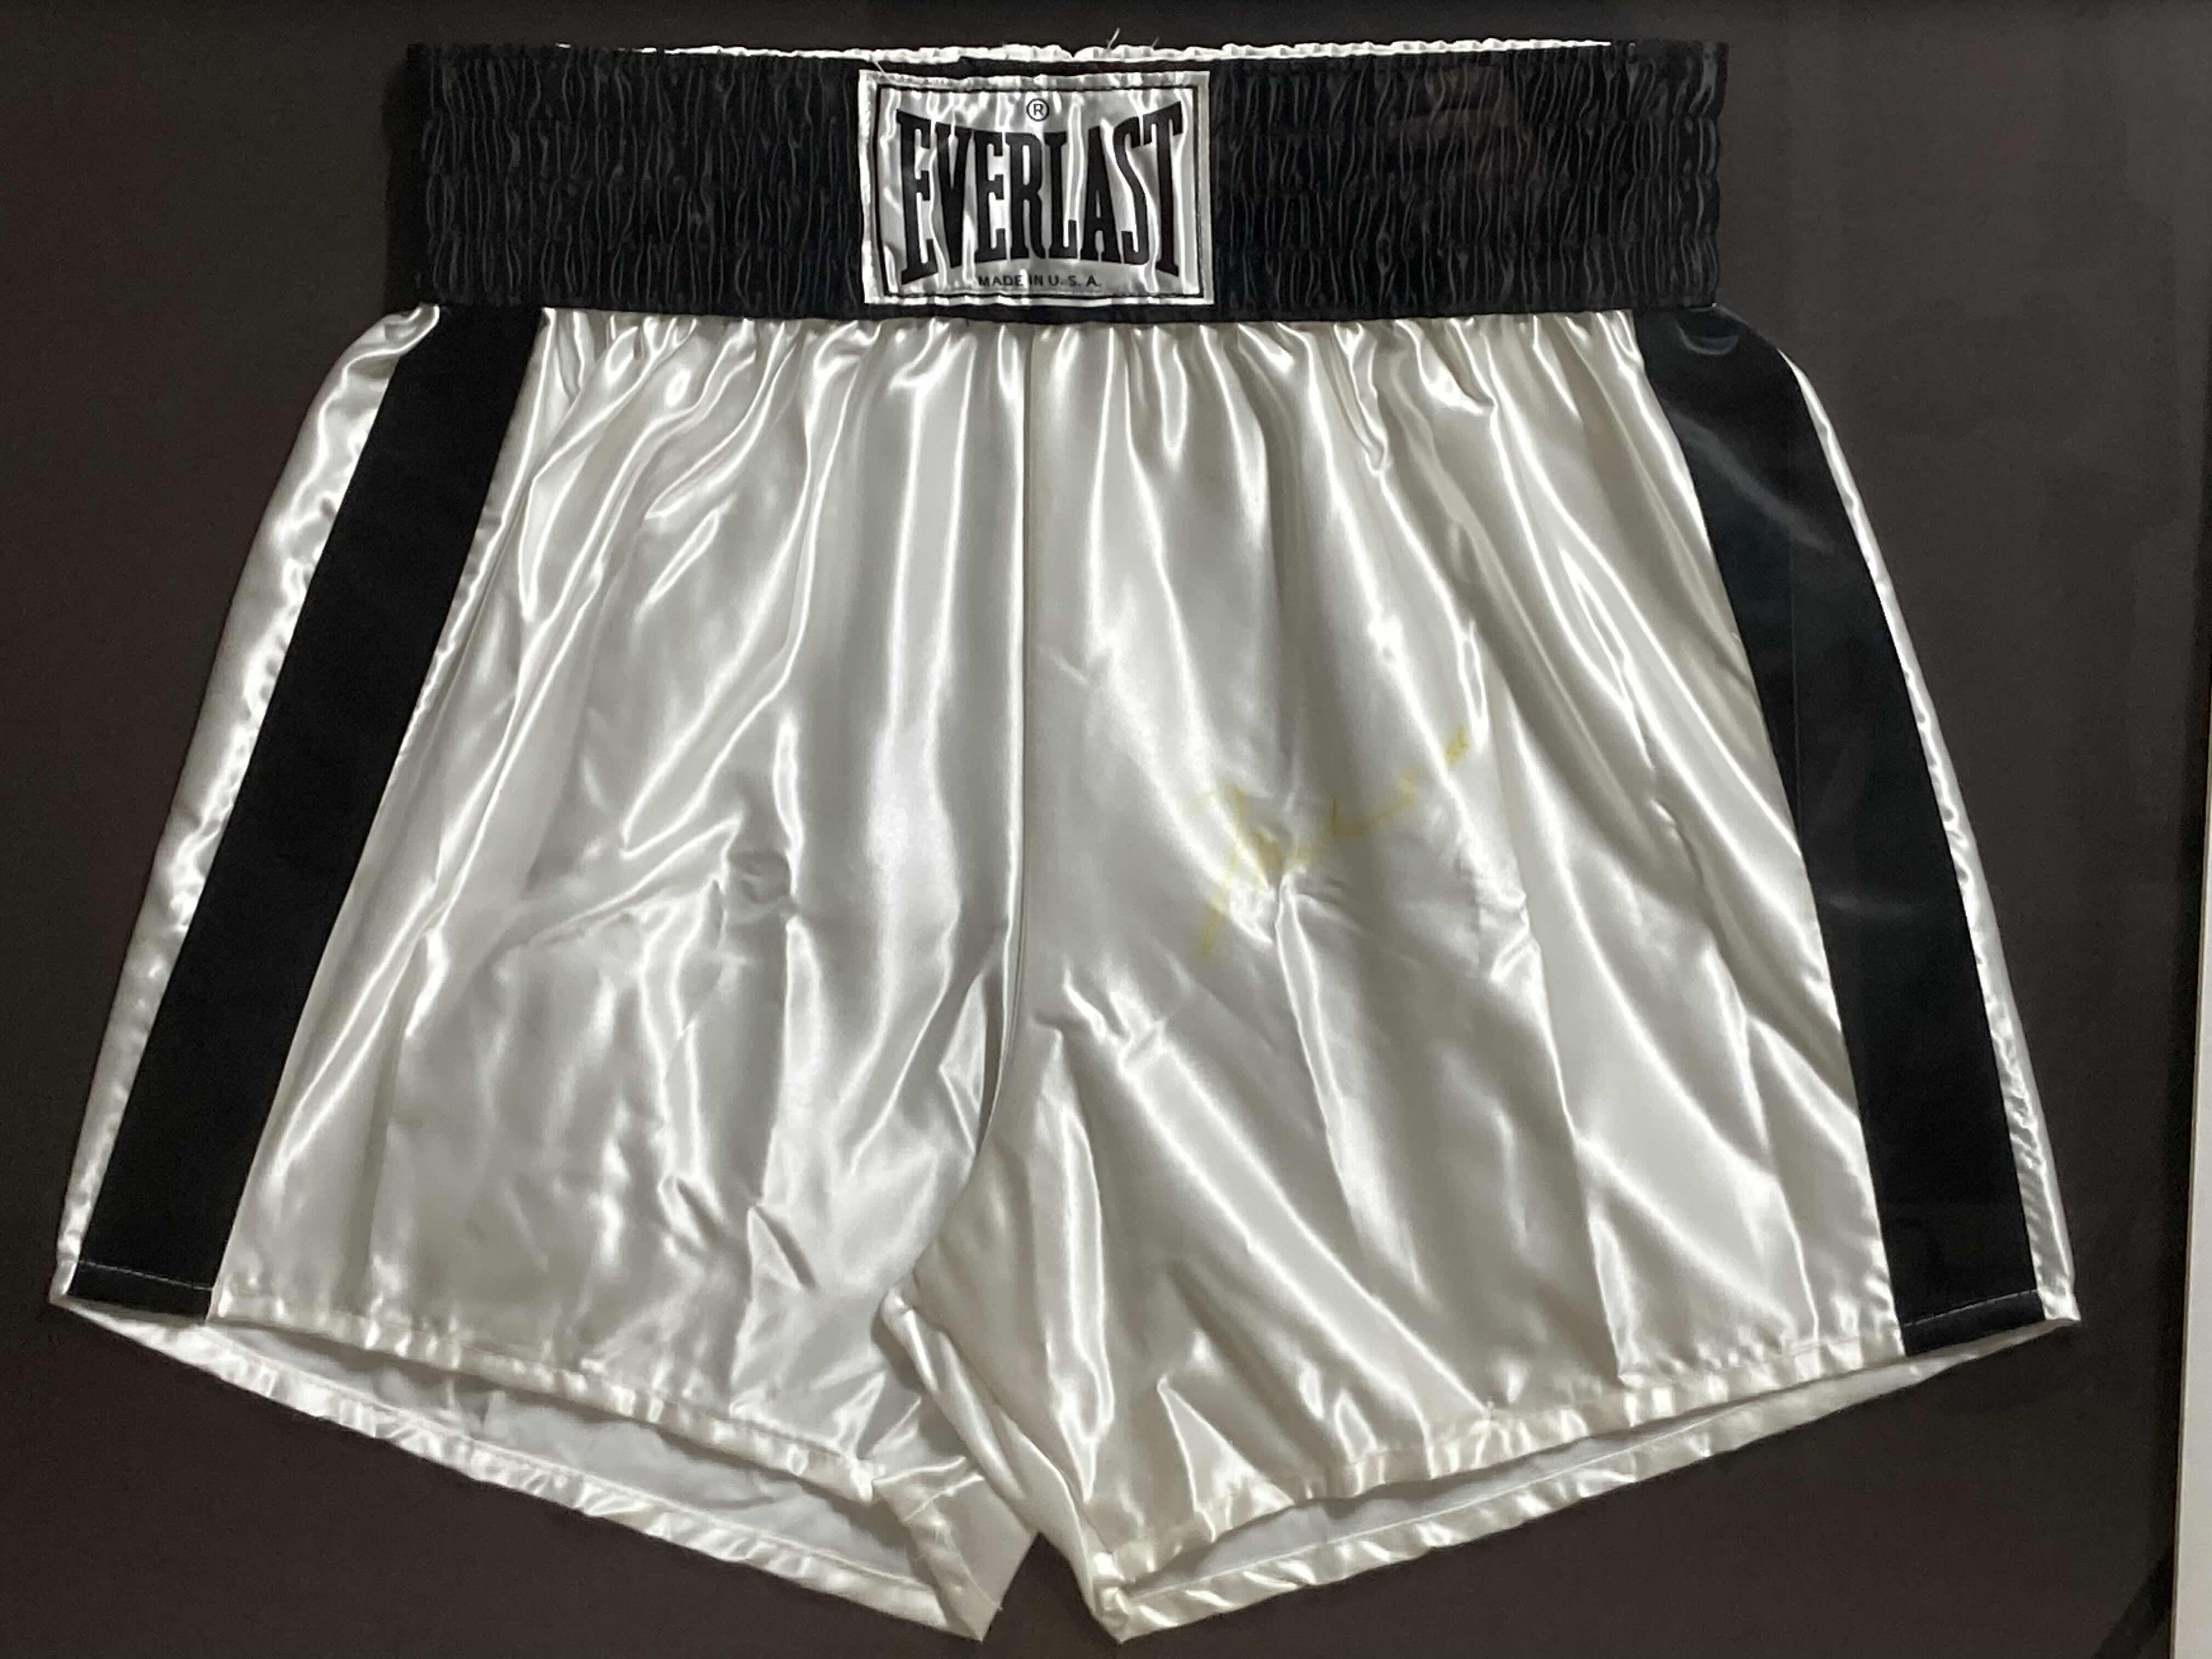 Photo 2 of MOHAMMED ALI FRAMED BOXING EVERLAST SHORTS AUTOGRAPHED BY MOHAMMED ALI NO COA 35” X 29.5”